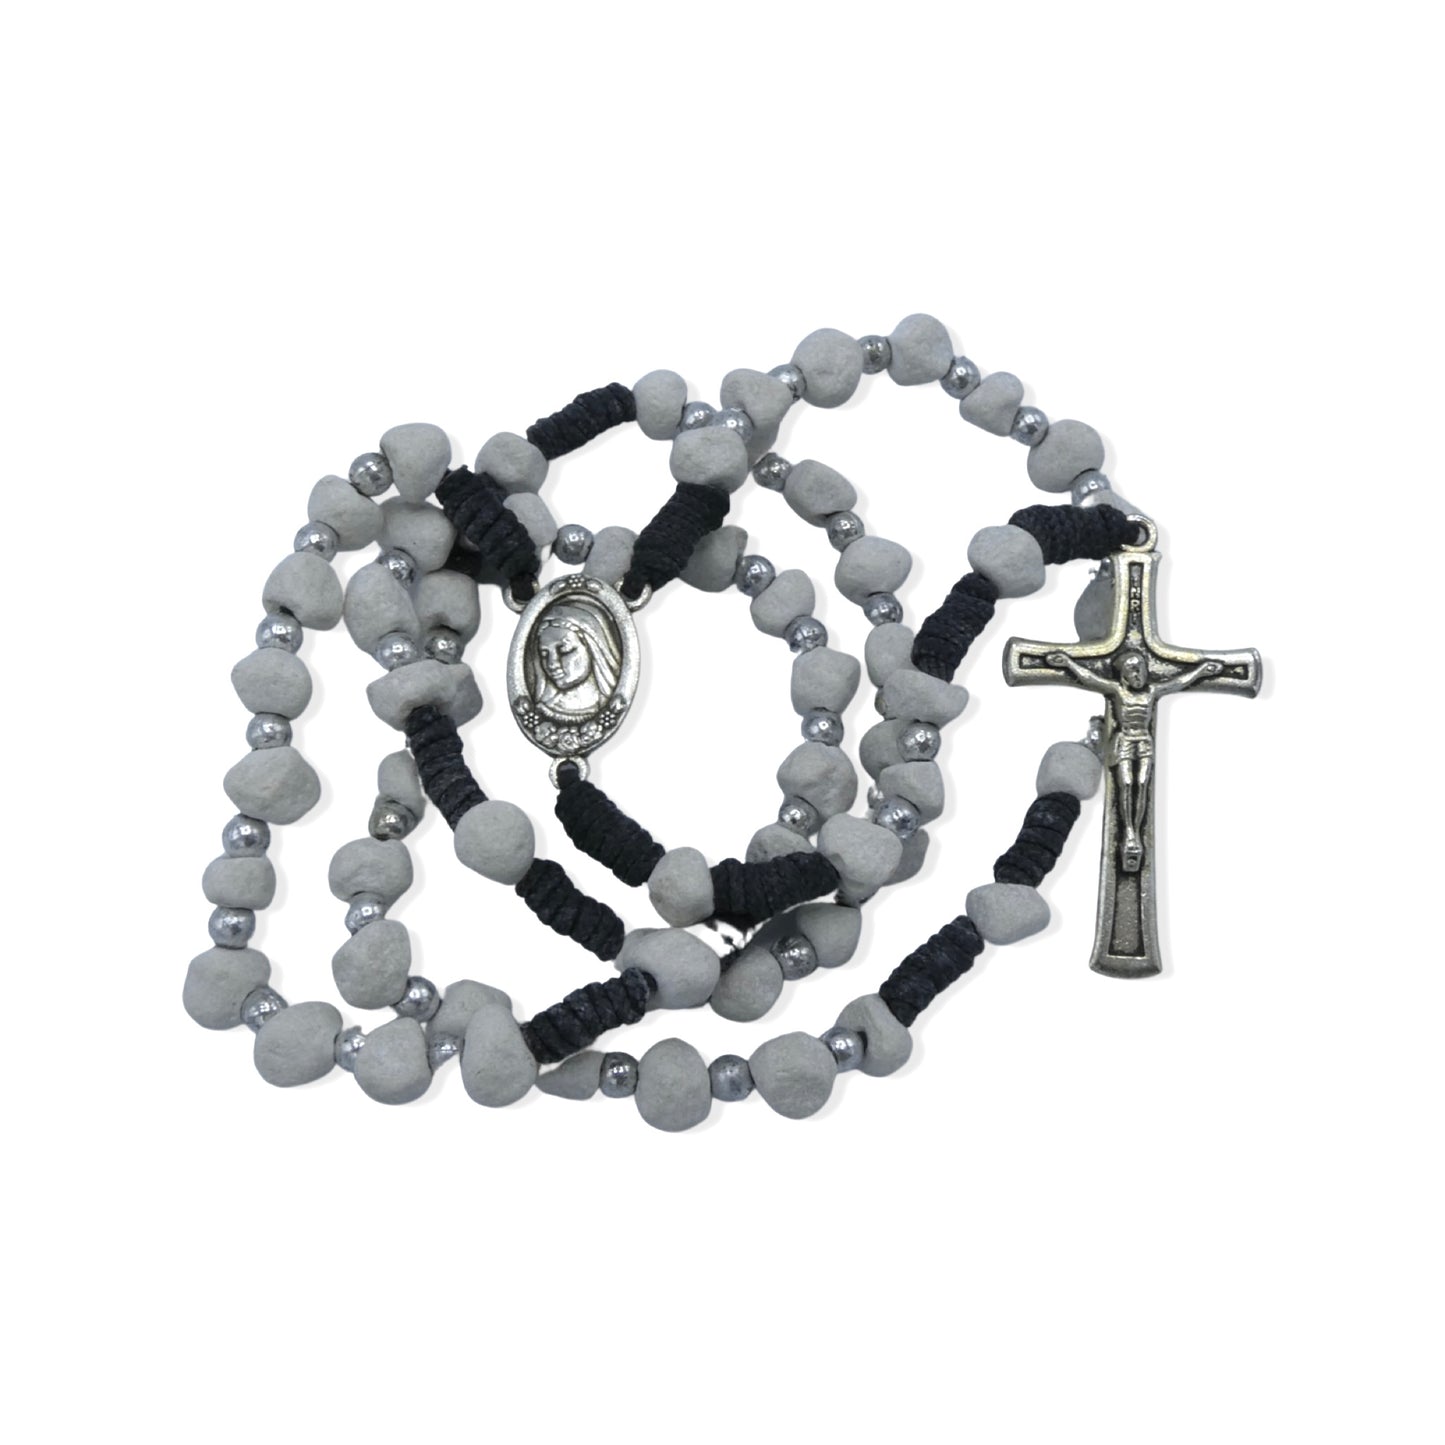 Embellished Queen of Peace Stone Rosary with Soil of Assorted Colors